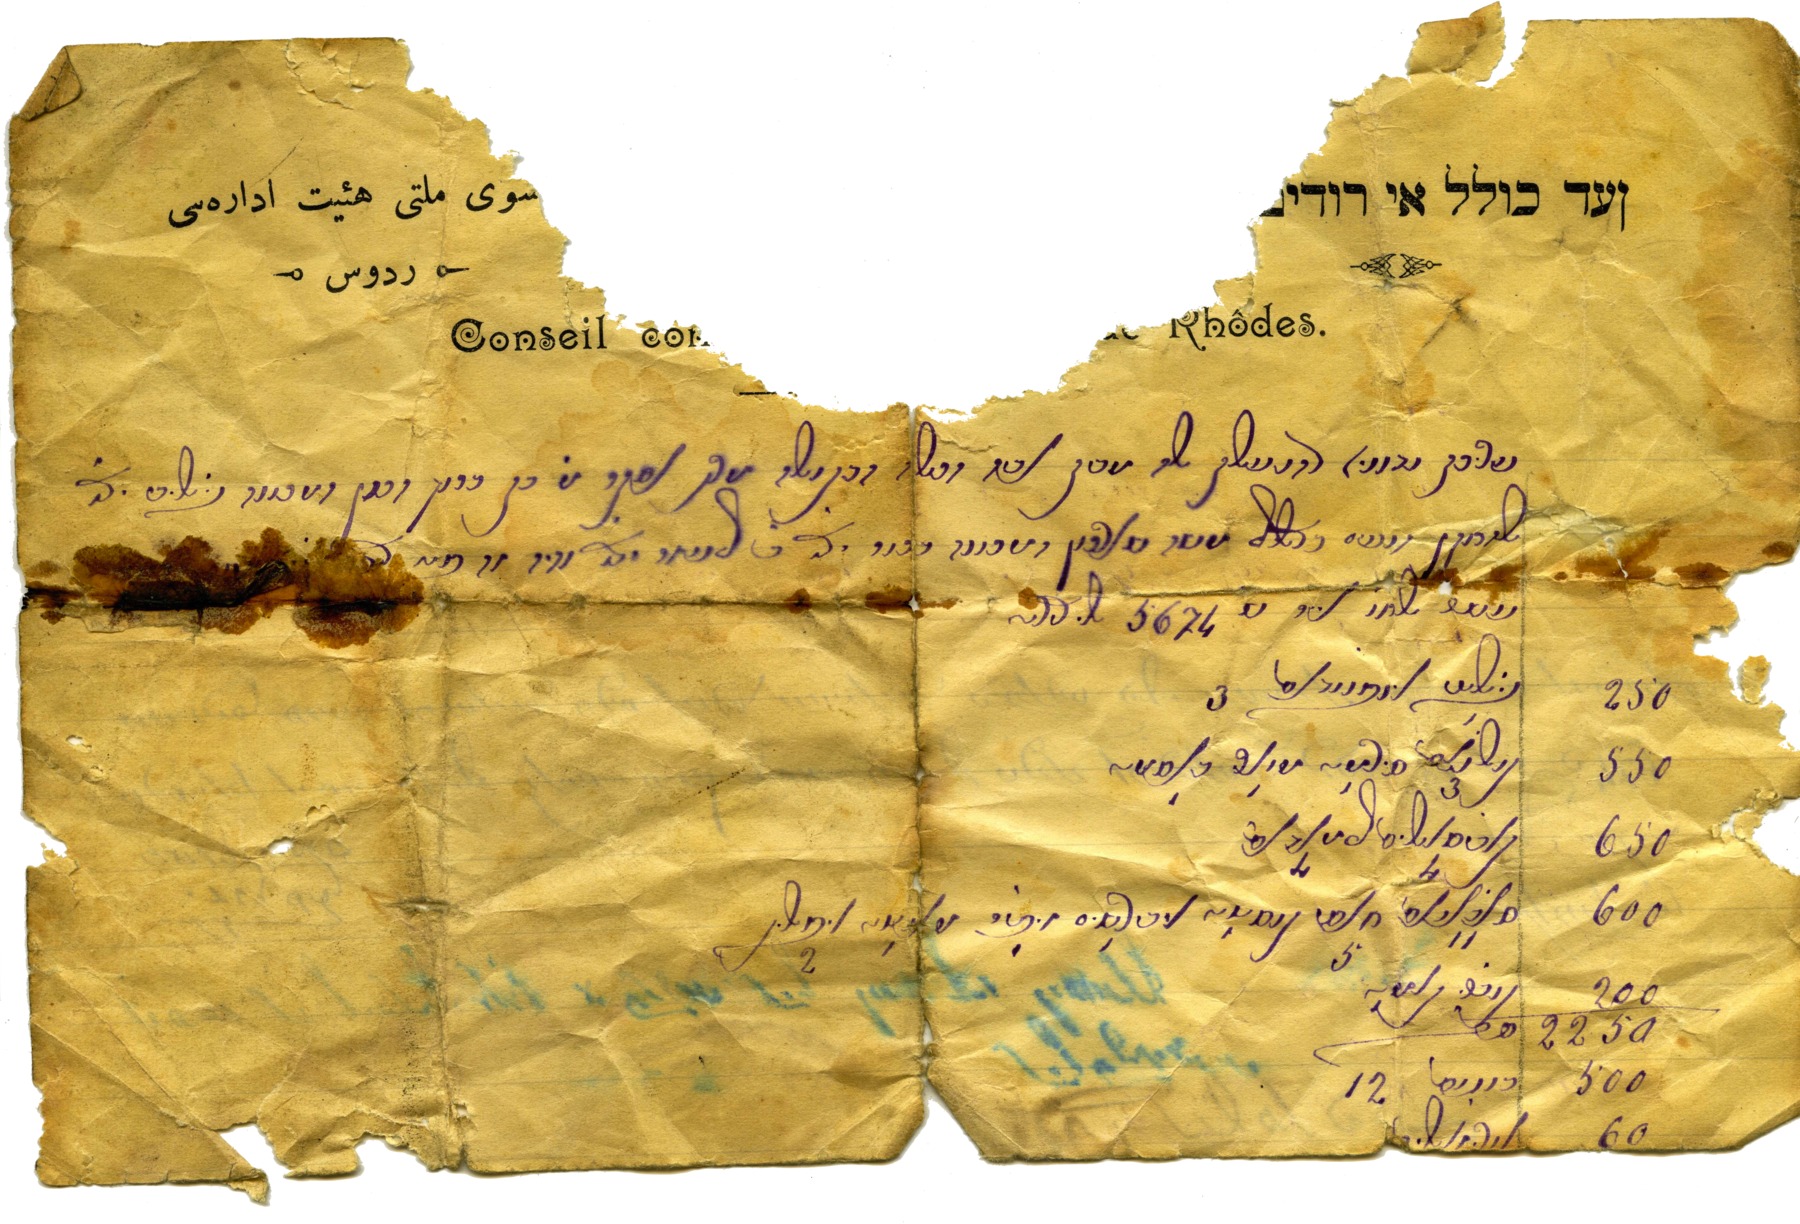 Rhodes Jewish community dowry assessments